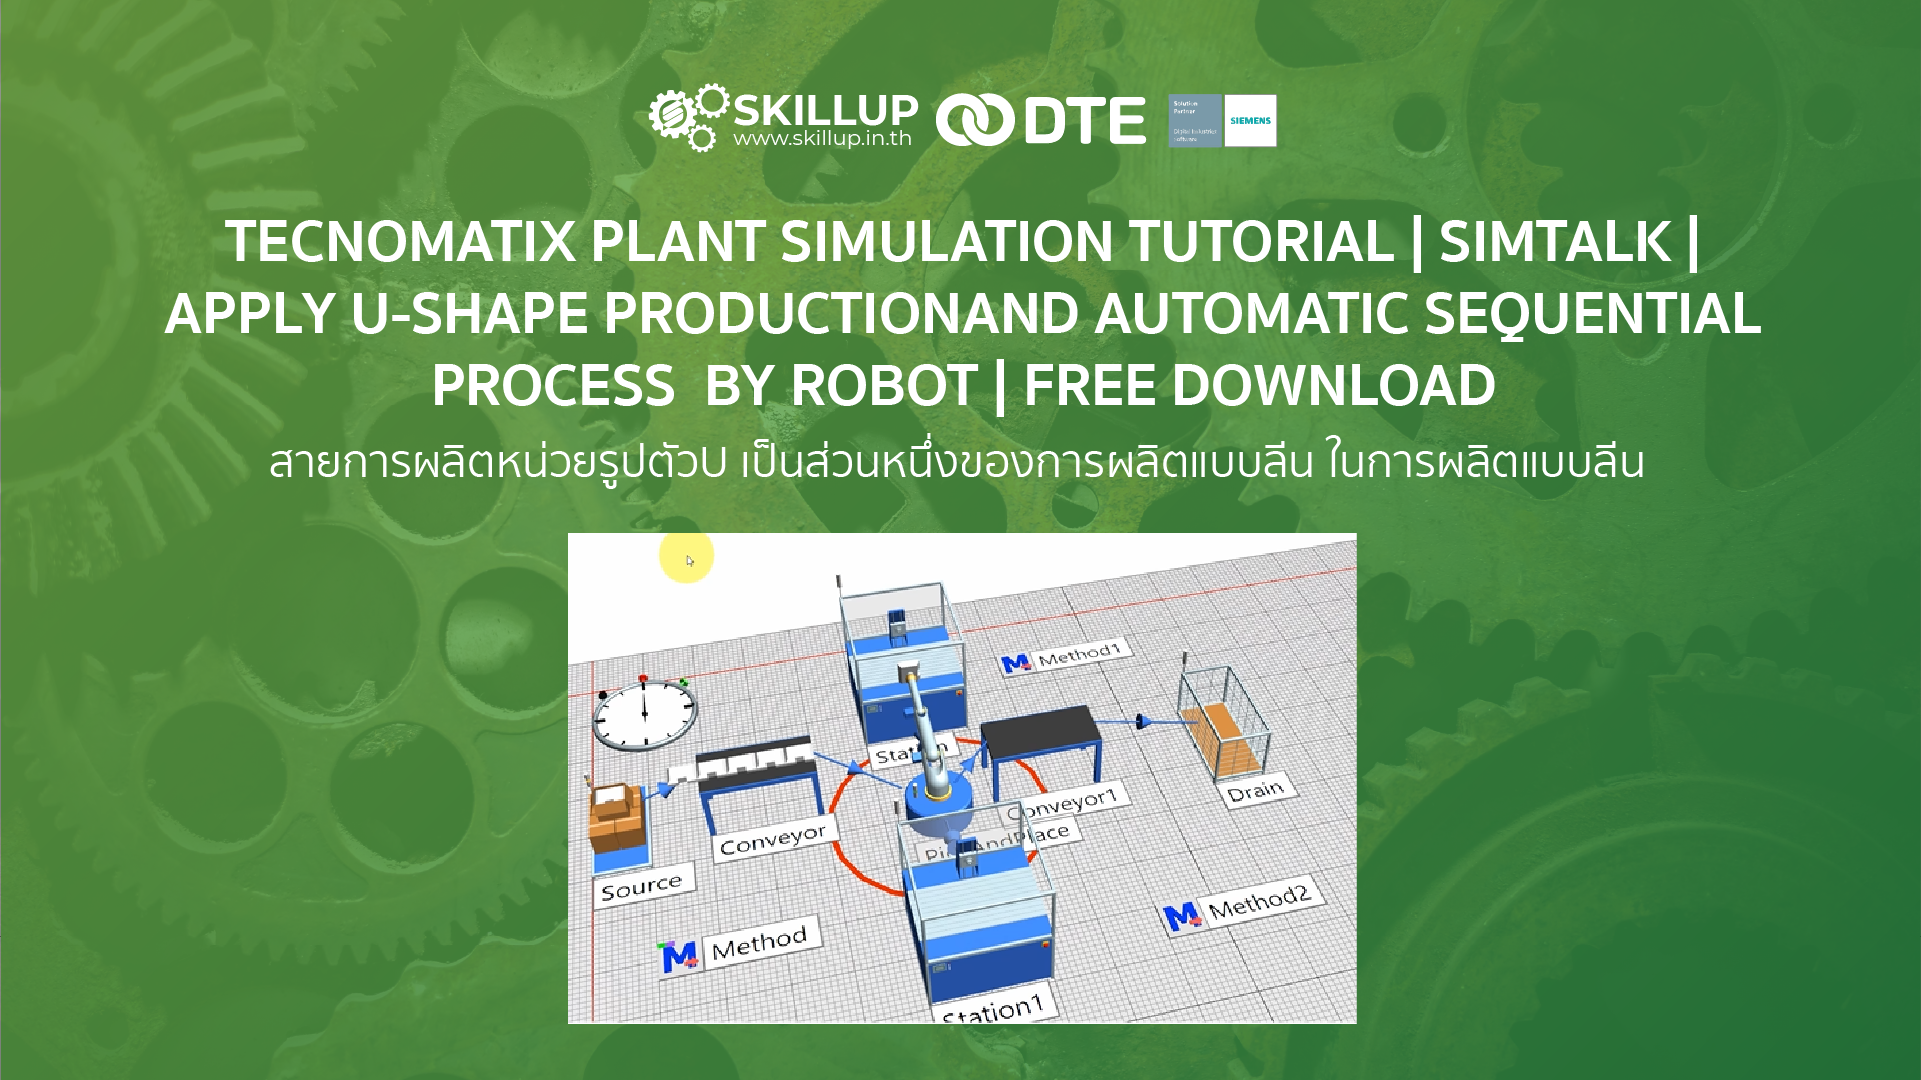 Tecnomatix Plant Simulation Tutorial | Simtalk | Apply U-shape production and Automatic sequential process by robot | Free download